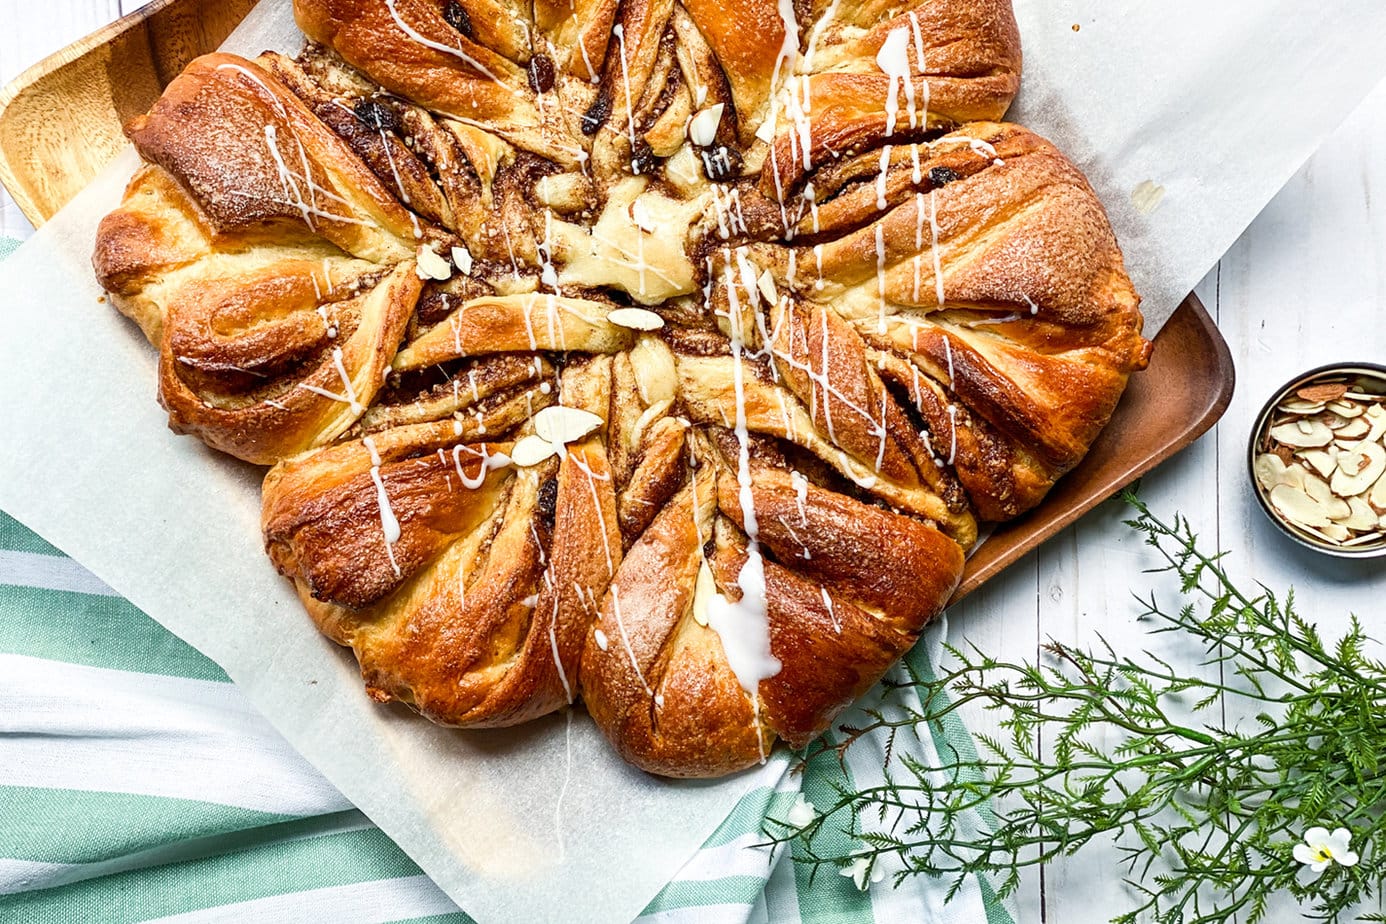 8 Beautiful and Delicious Easter Breads to Add to Your Holiday Table